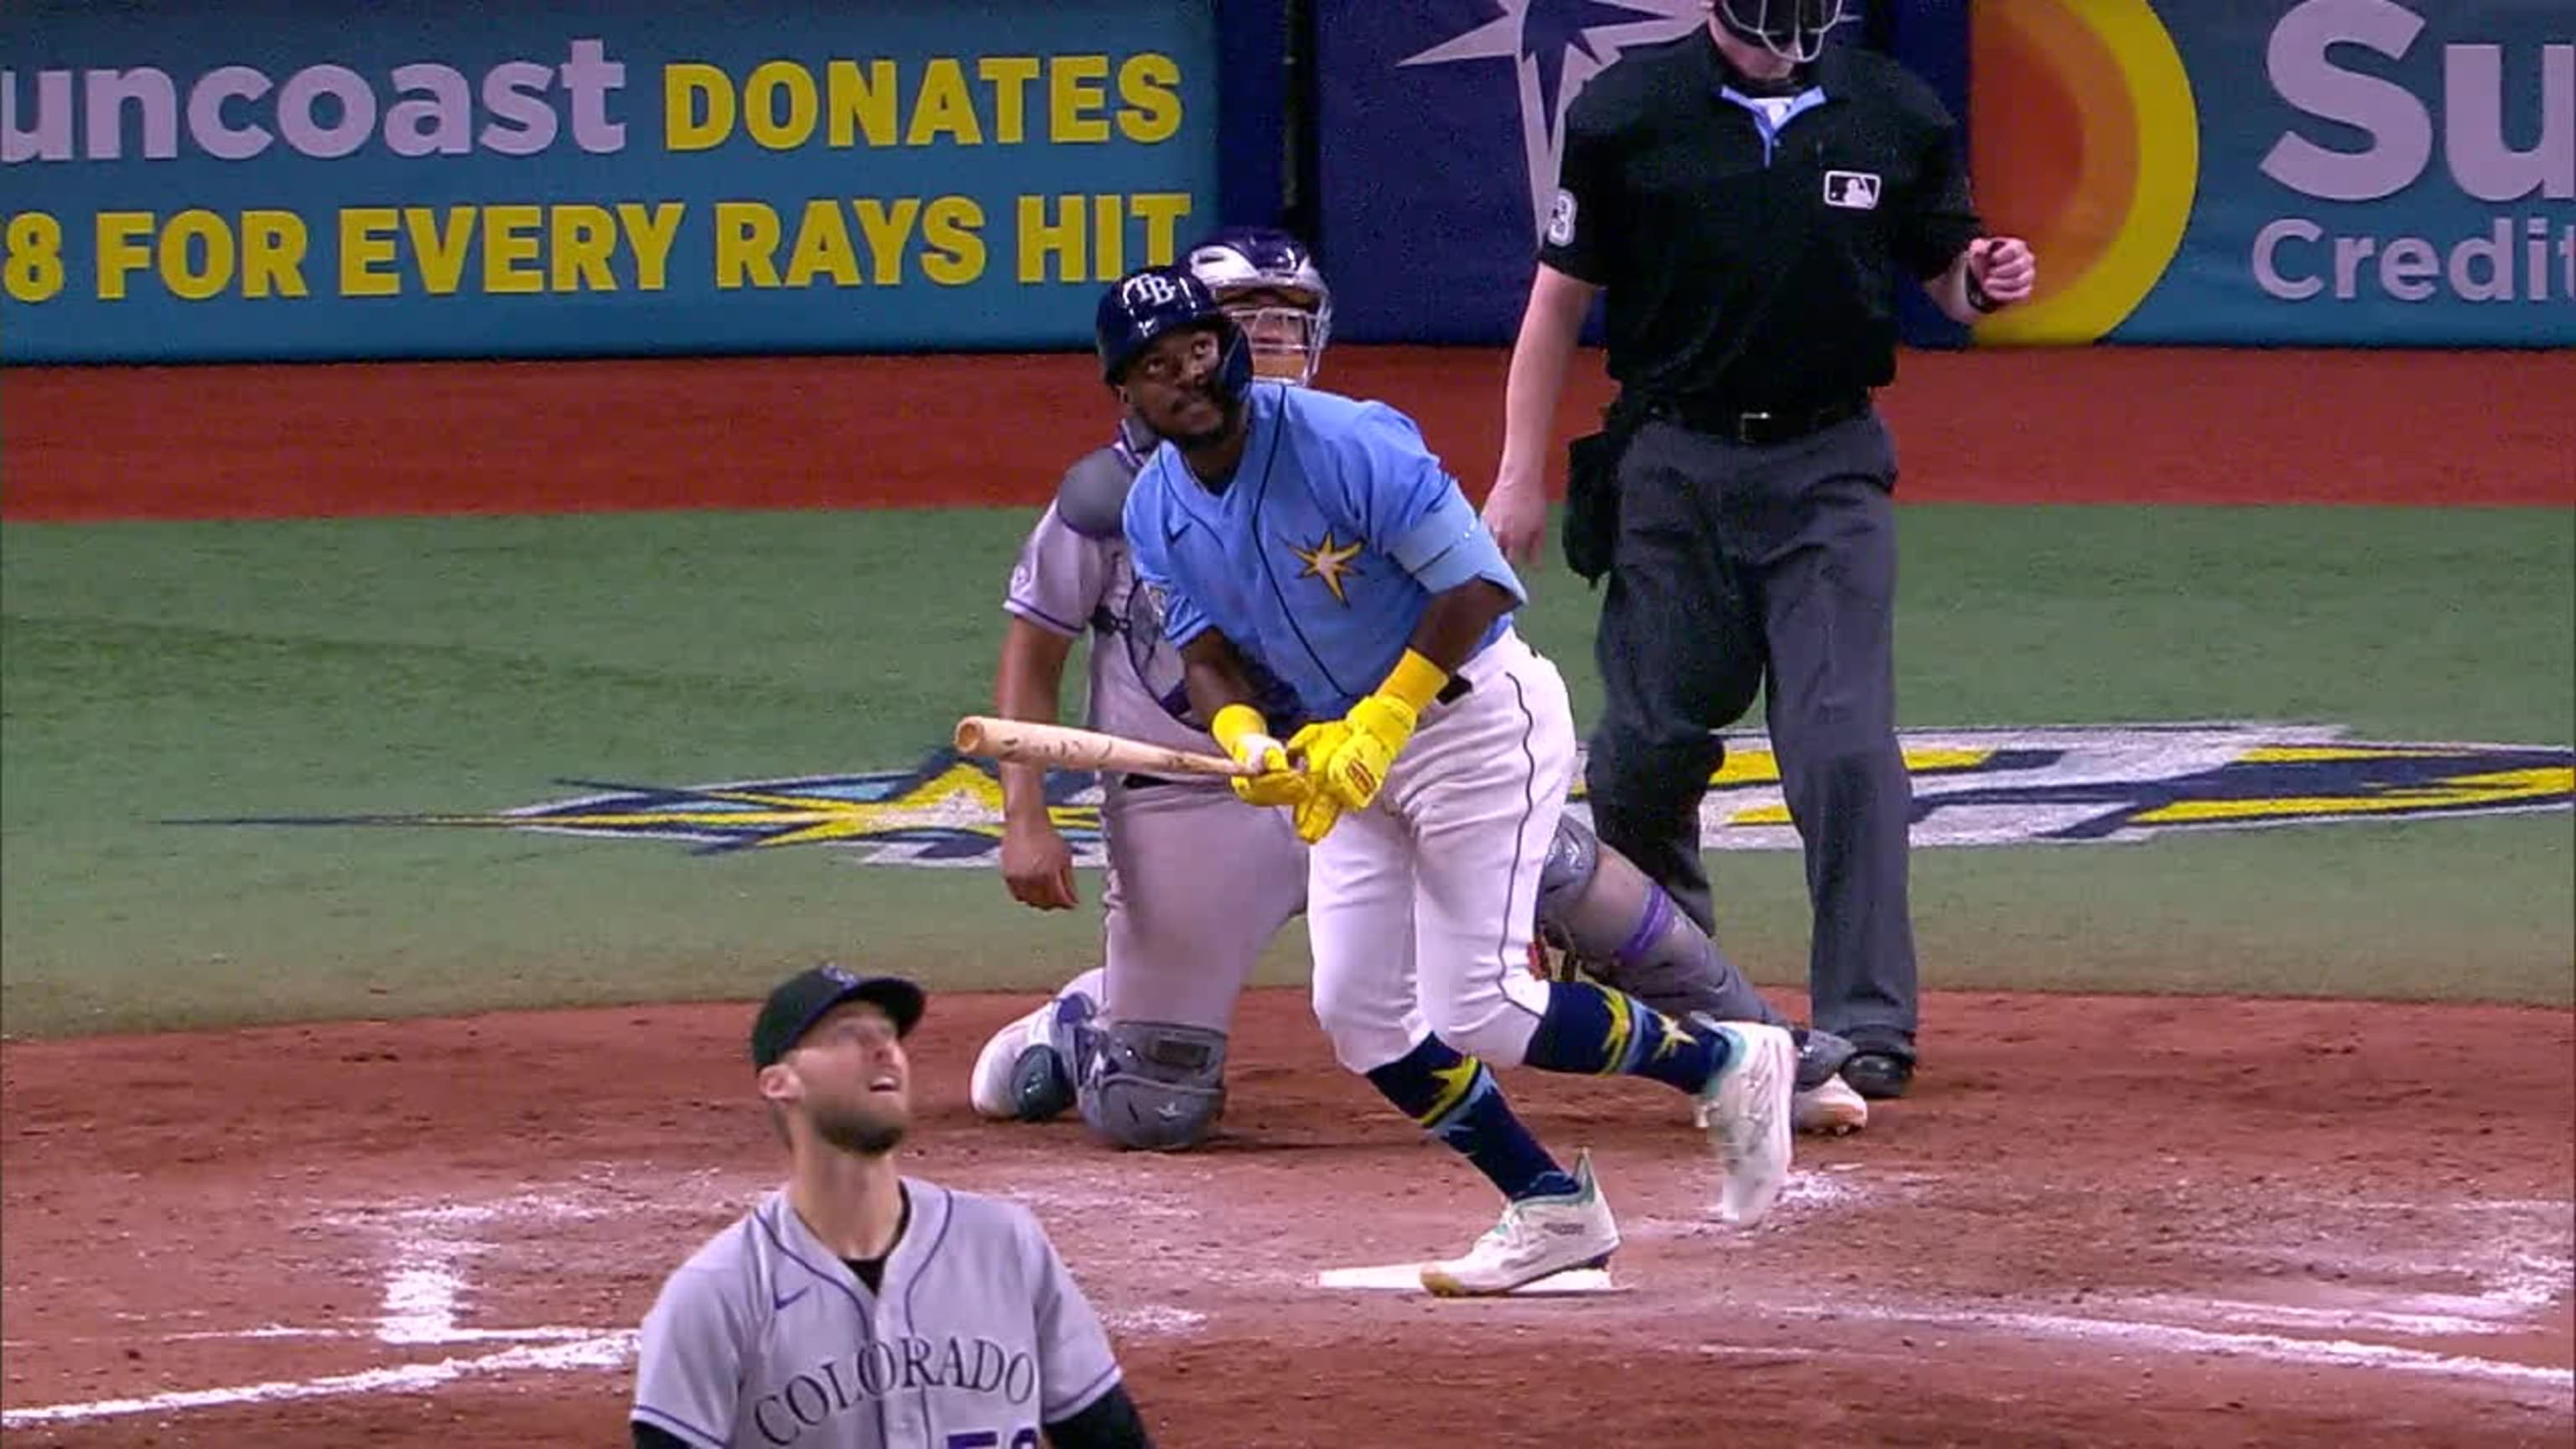 Paredes hits 2 homers, Rays beat Sox 12-4